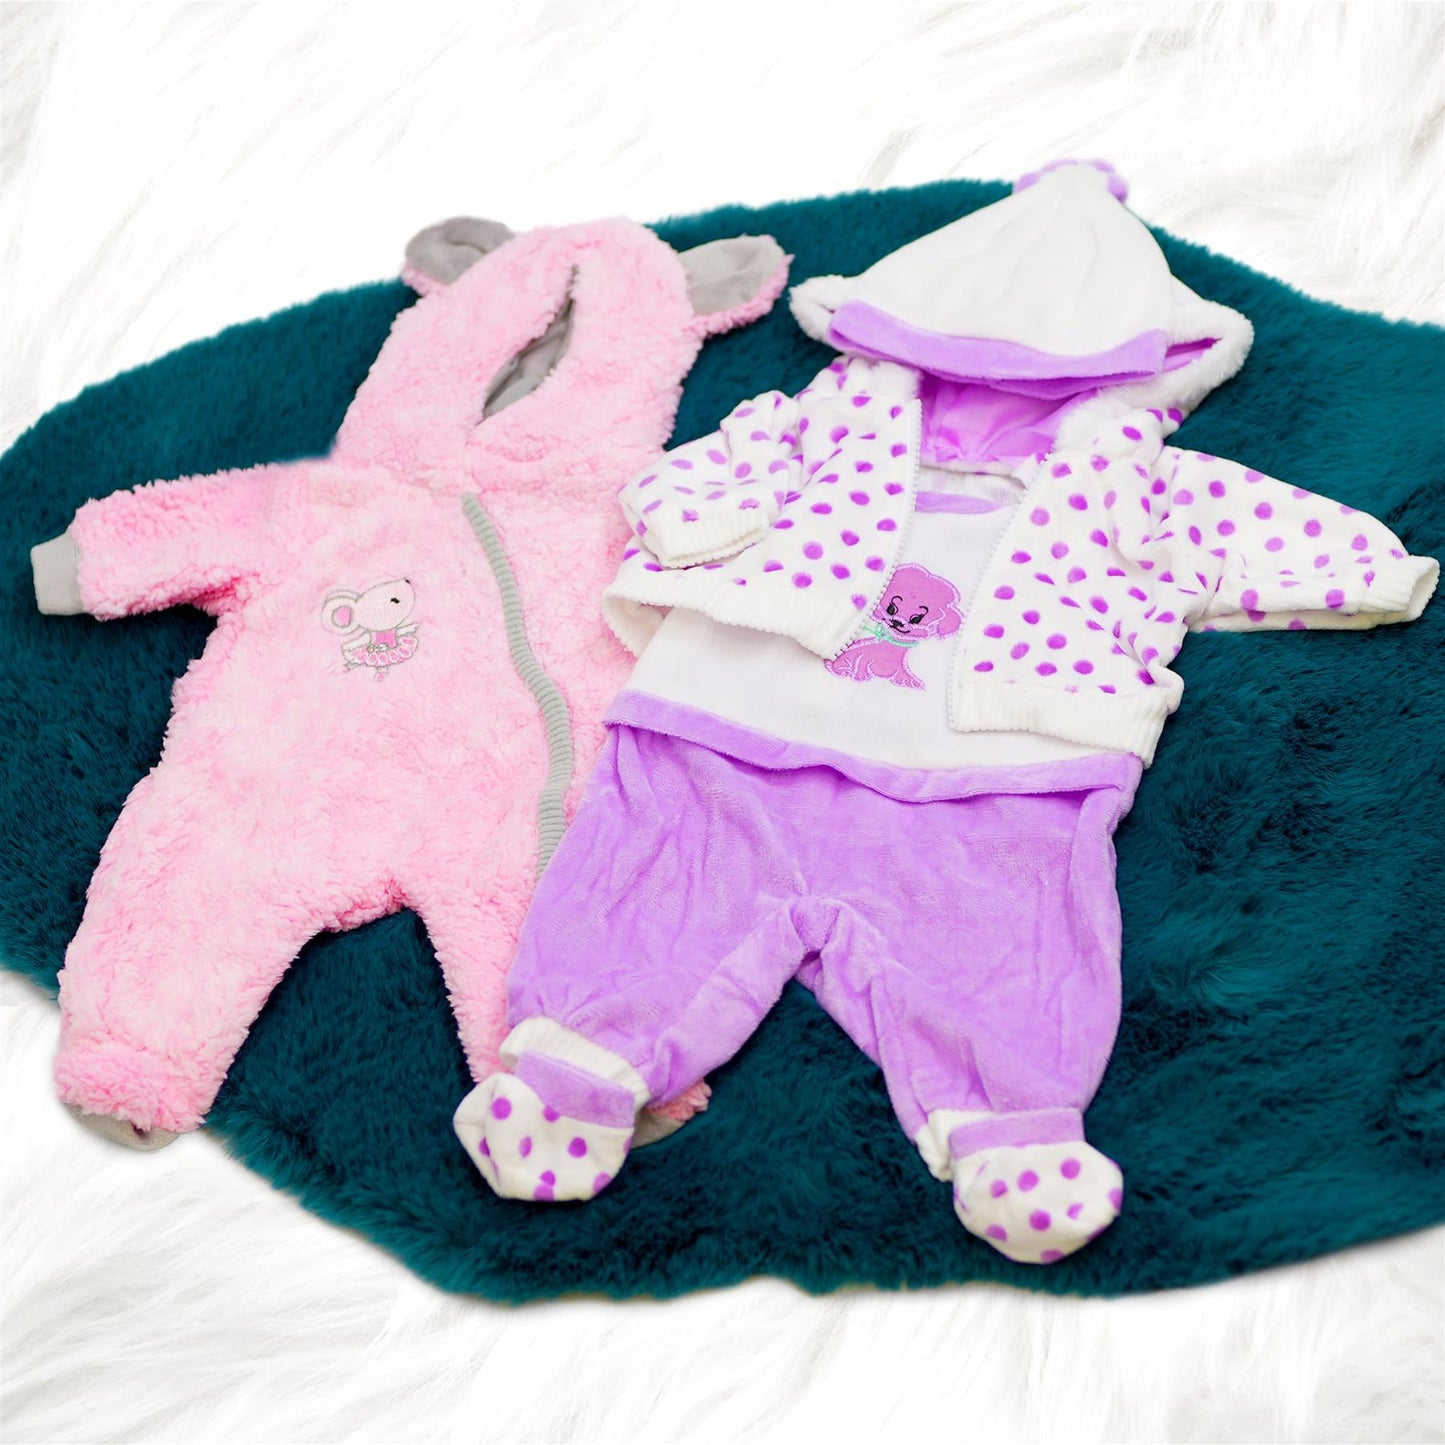 18" Baby Doll Pink and Purple Clothes Set by BiBi Doll - UKBuyZone